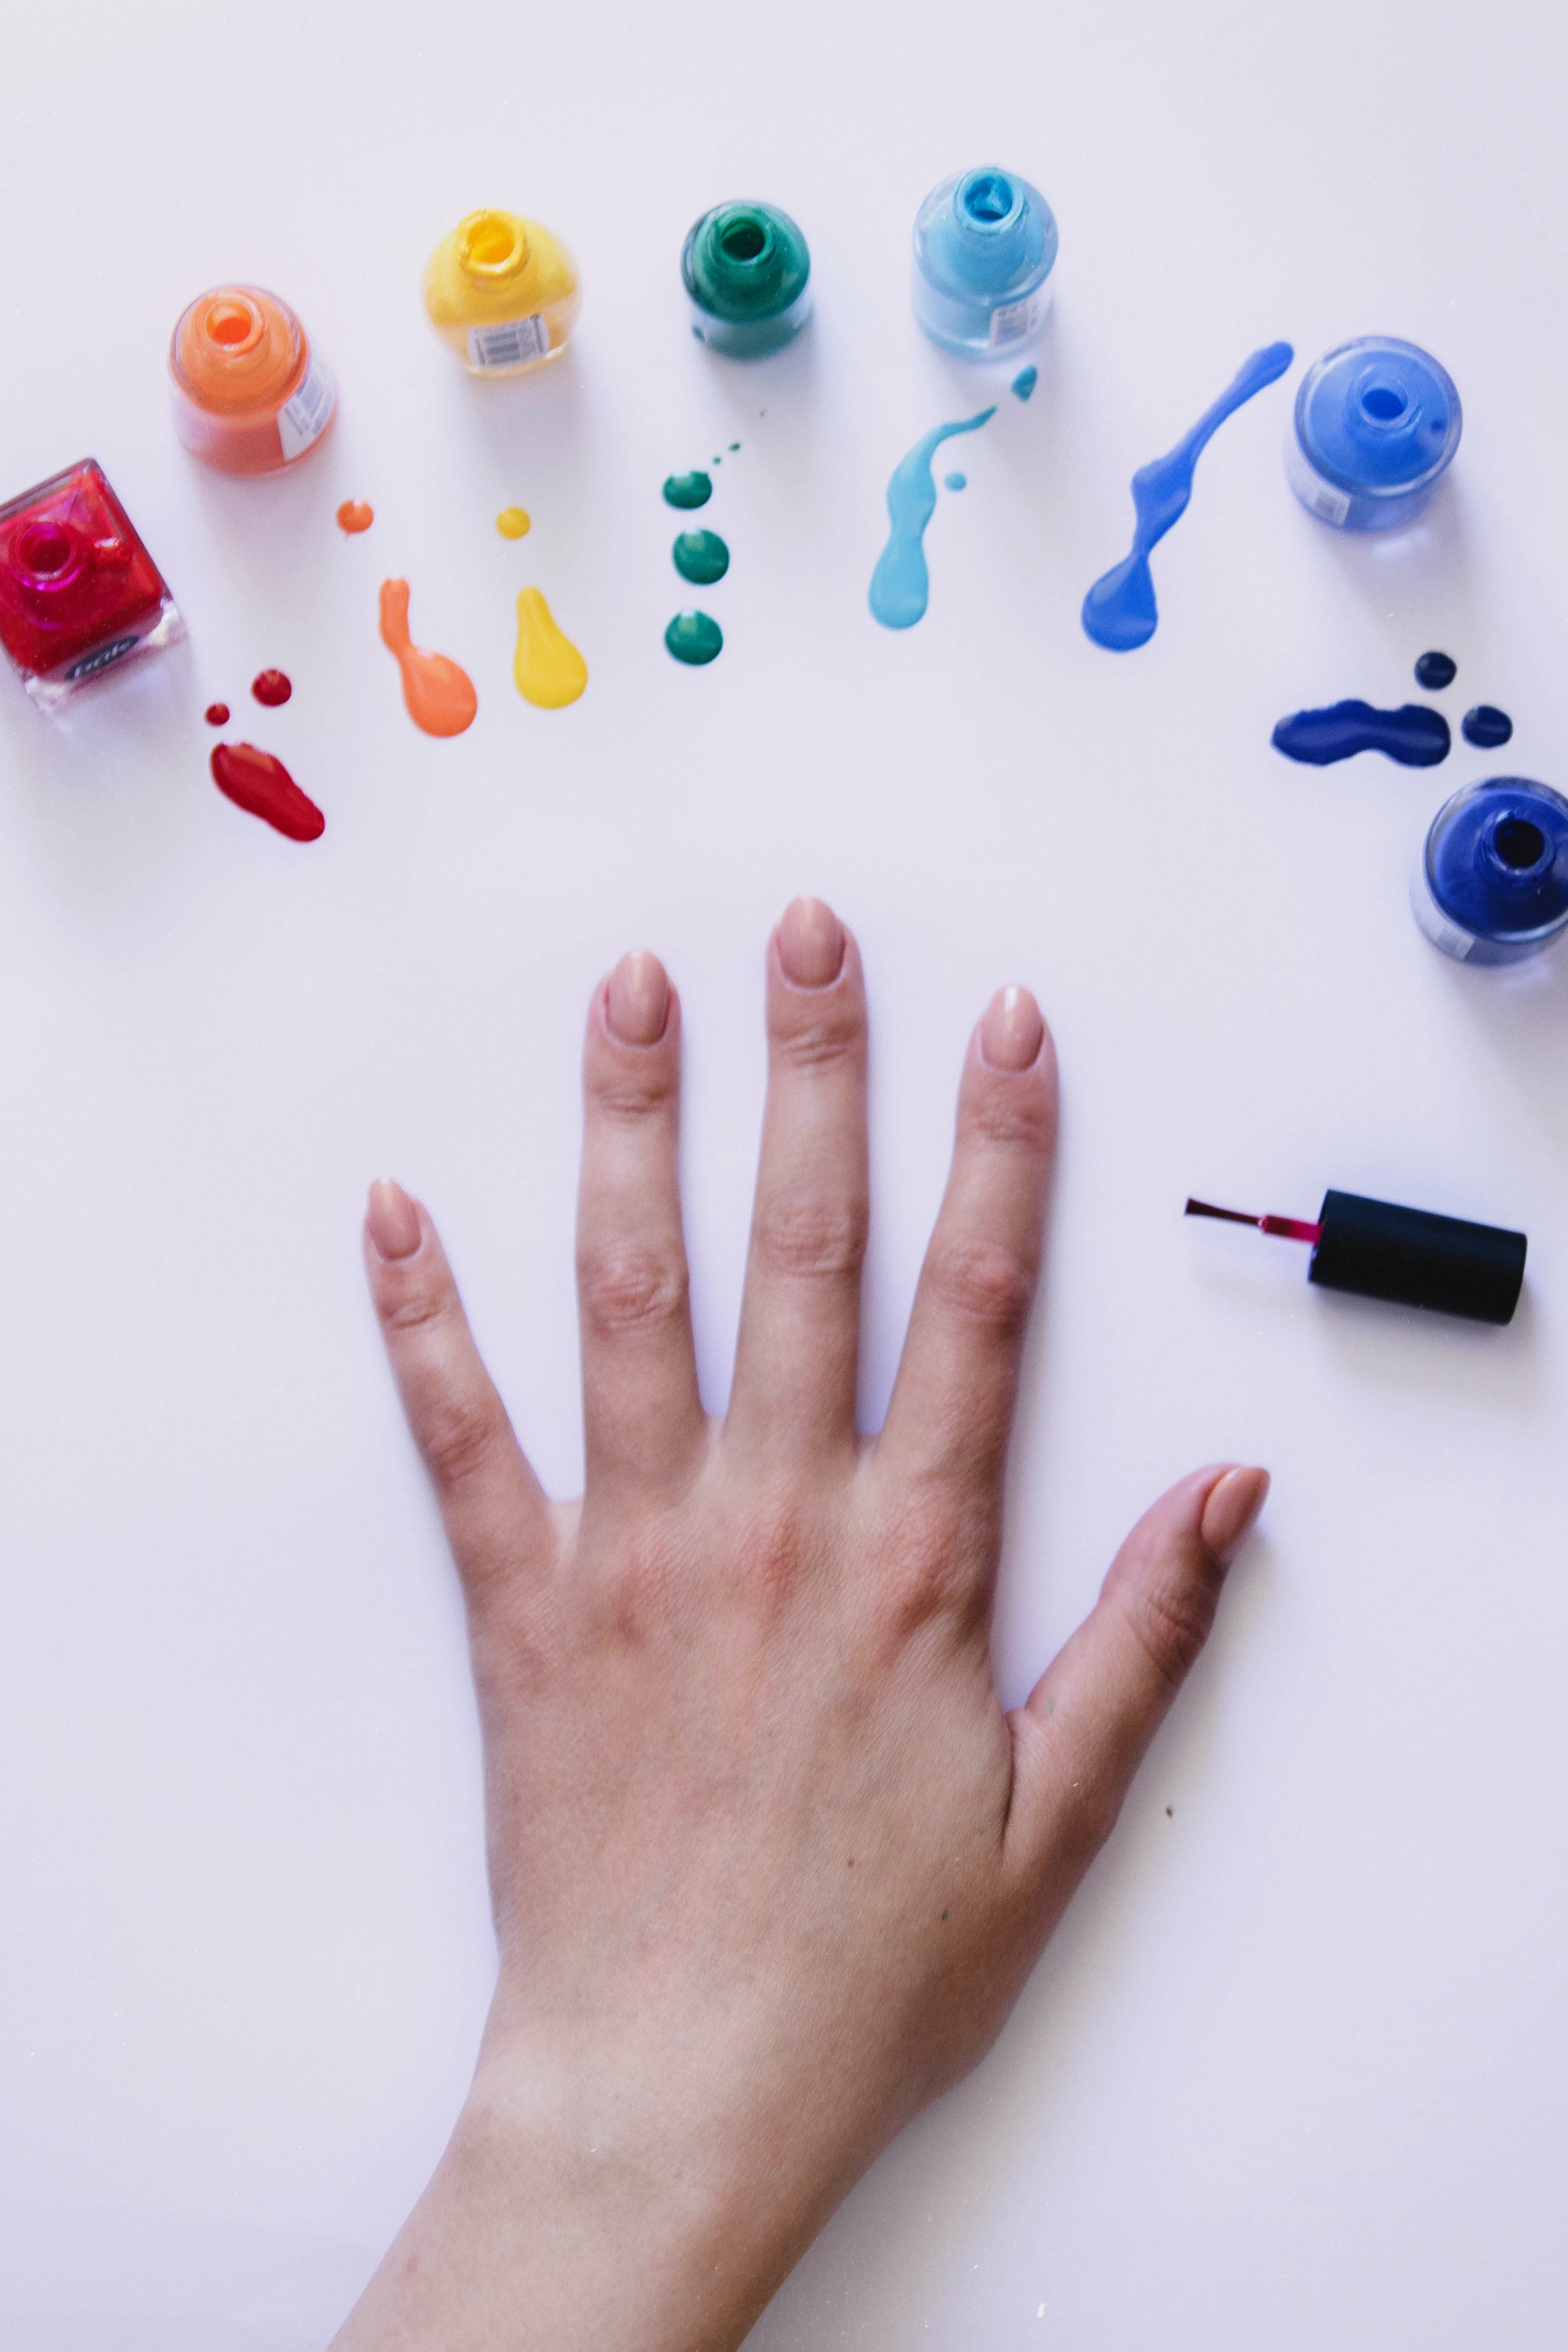 A photo of a woman's hand placed on the table next to nail polishes | Source: Pexels